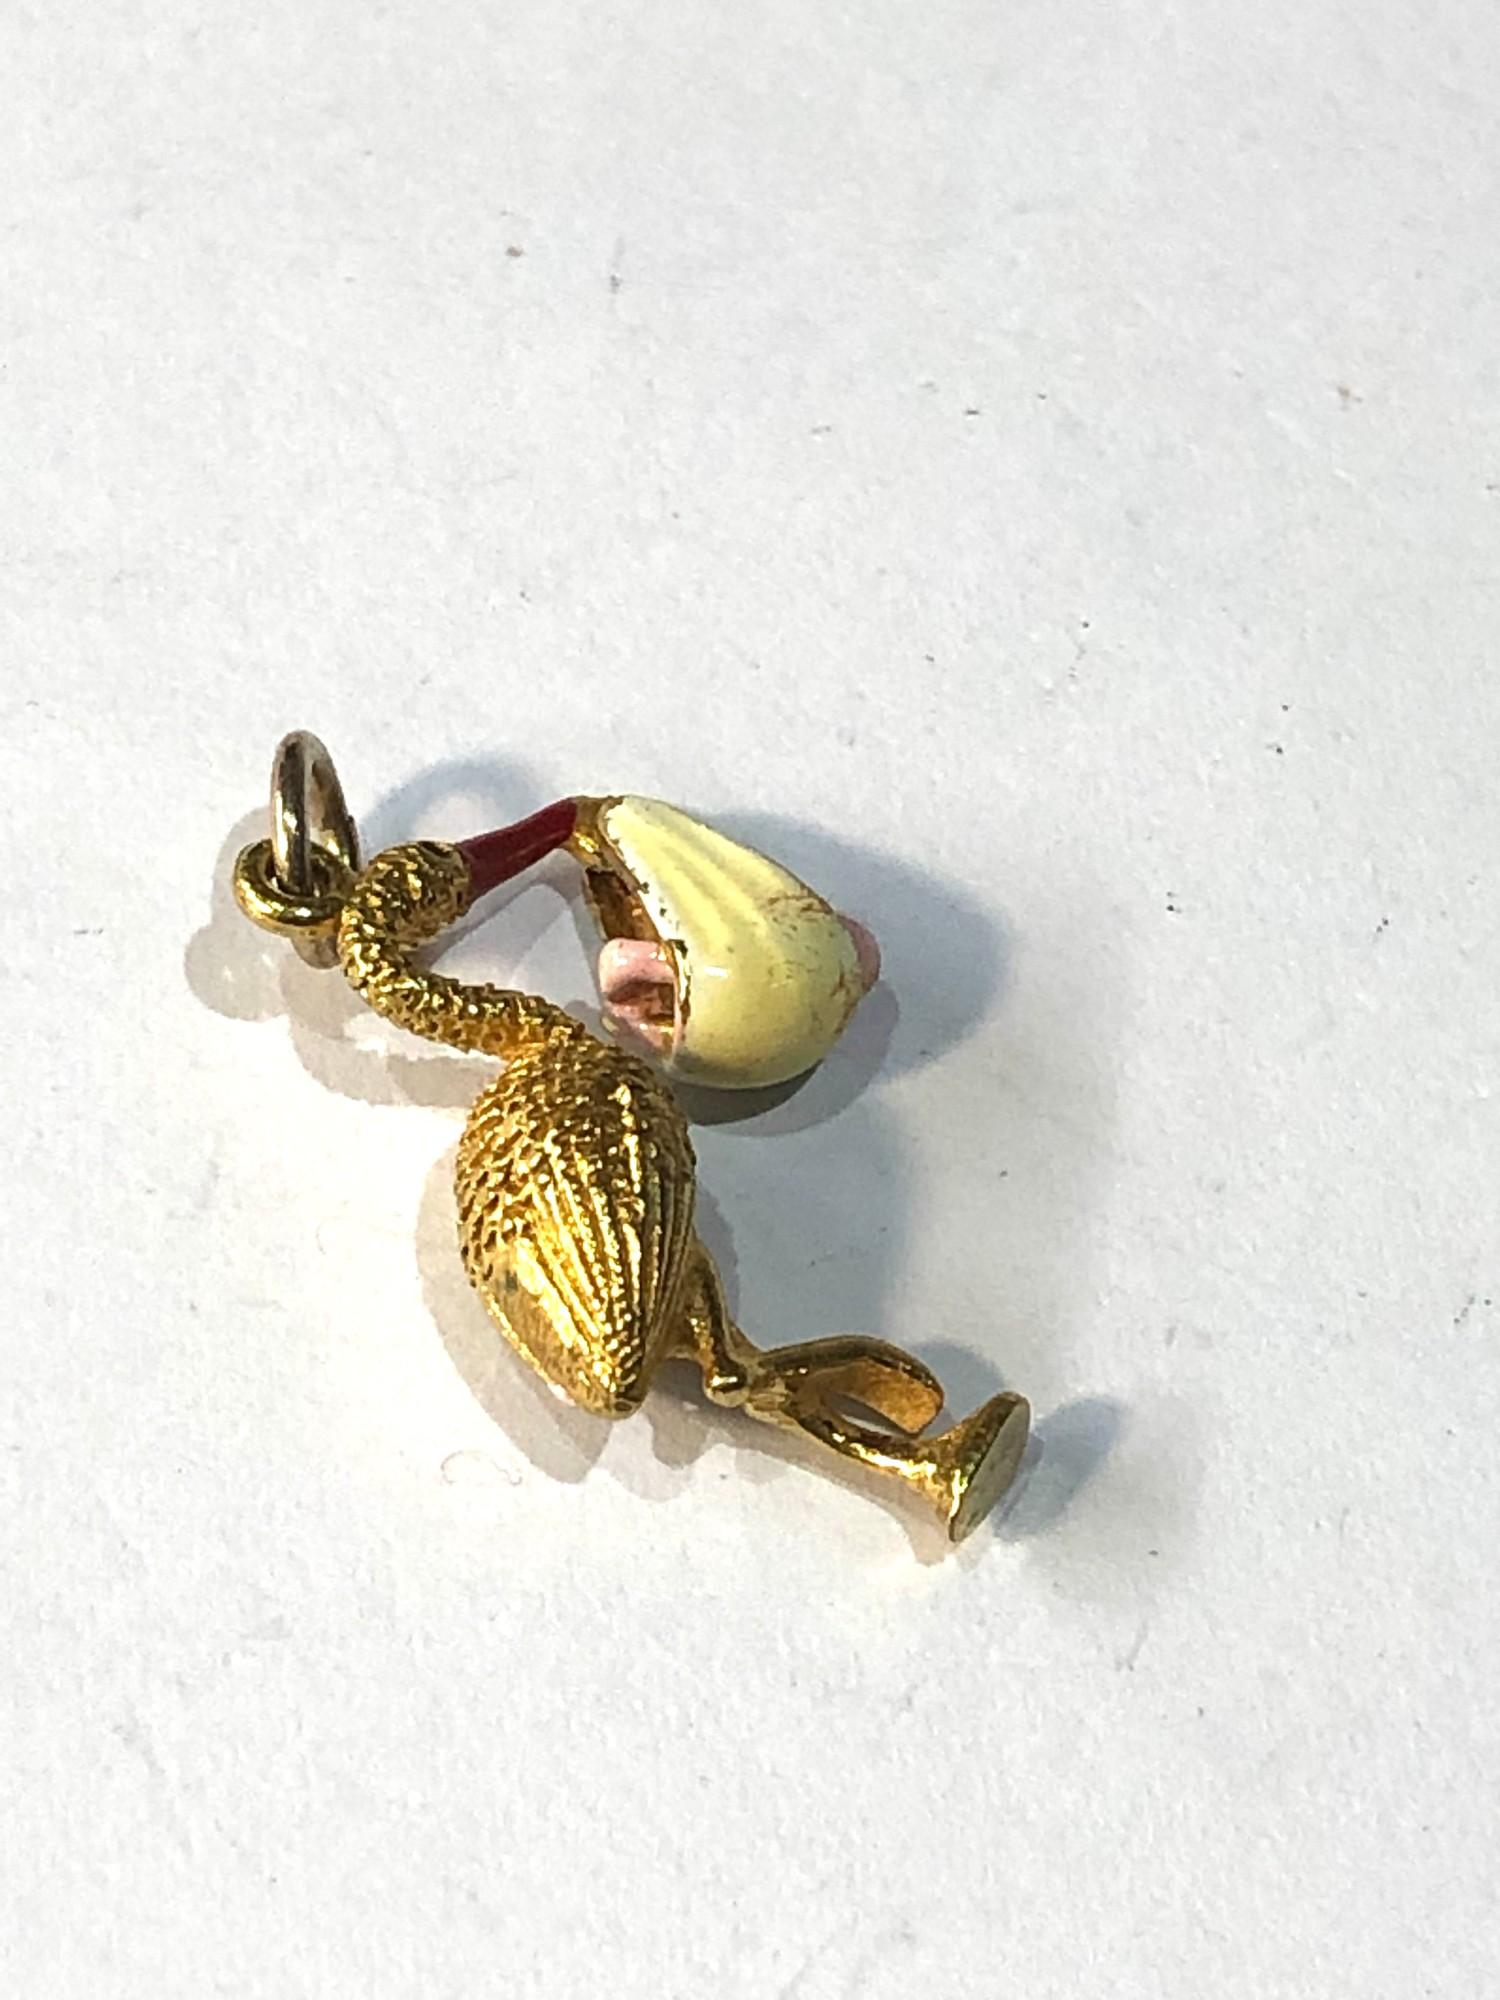 14ct gold enamel enamelled stork carrying baby charm (articulated) weight 2.9g - Image 3 of 3